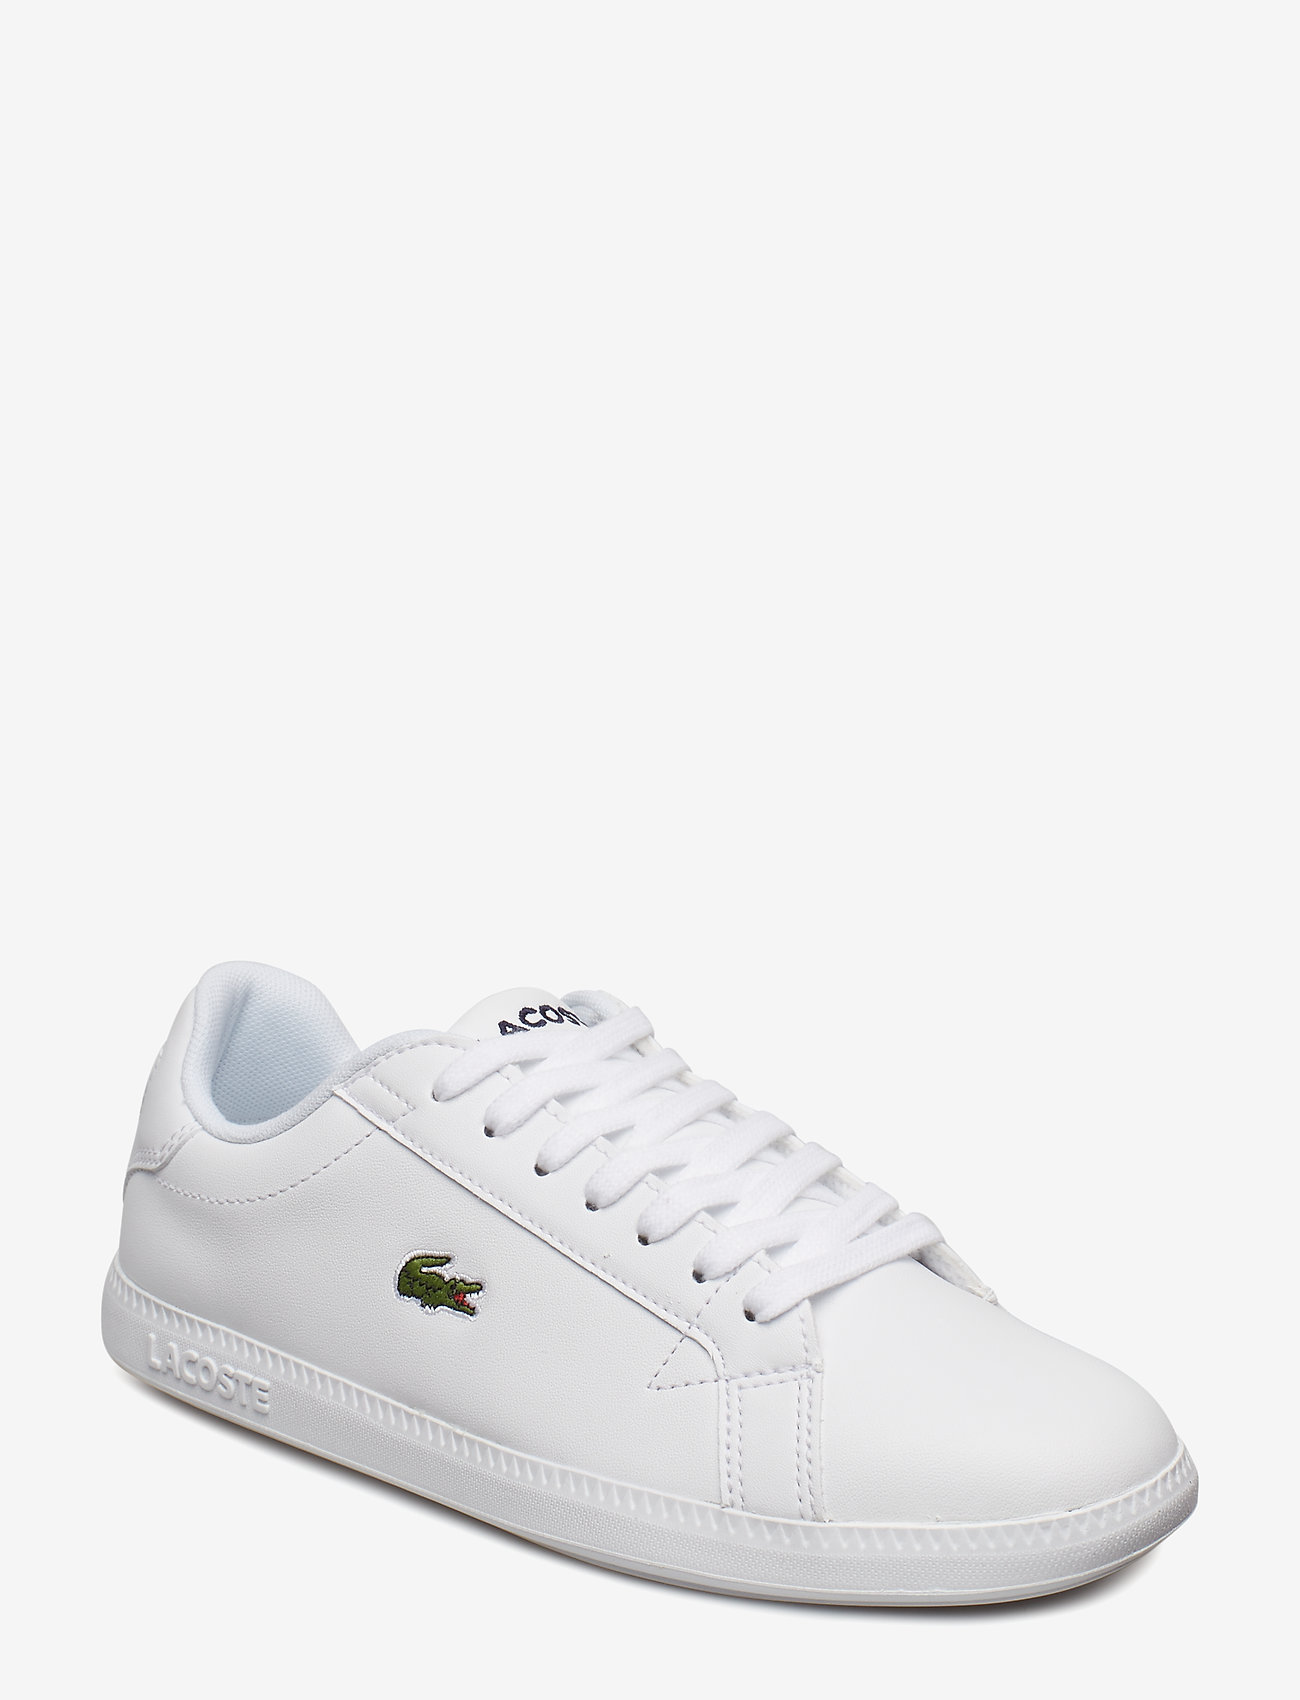 Lacoste Shoes - GRADUATE BL 1 SFA - low top sneakers - wht/wht lth/syn - 0